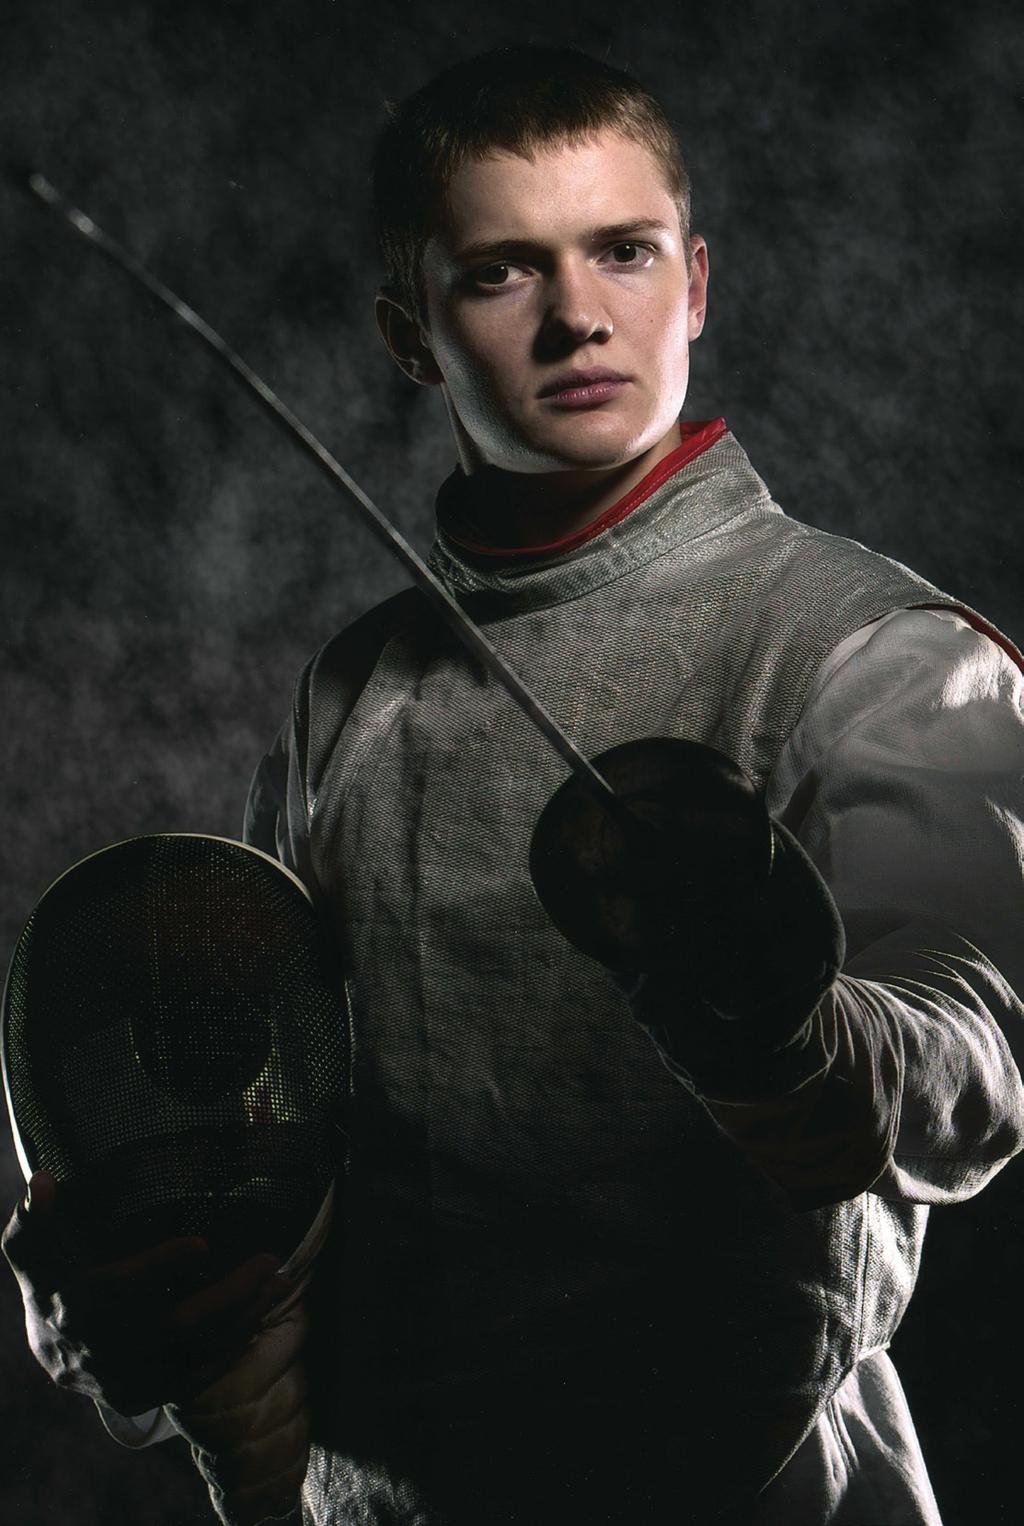 Nancy Campbell Academy students can train with Canadian high performance and developing fencers